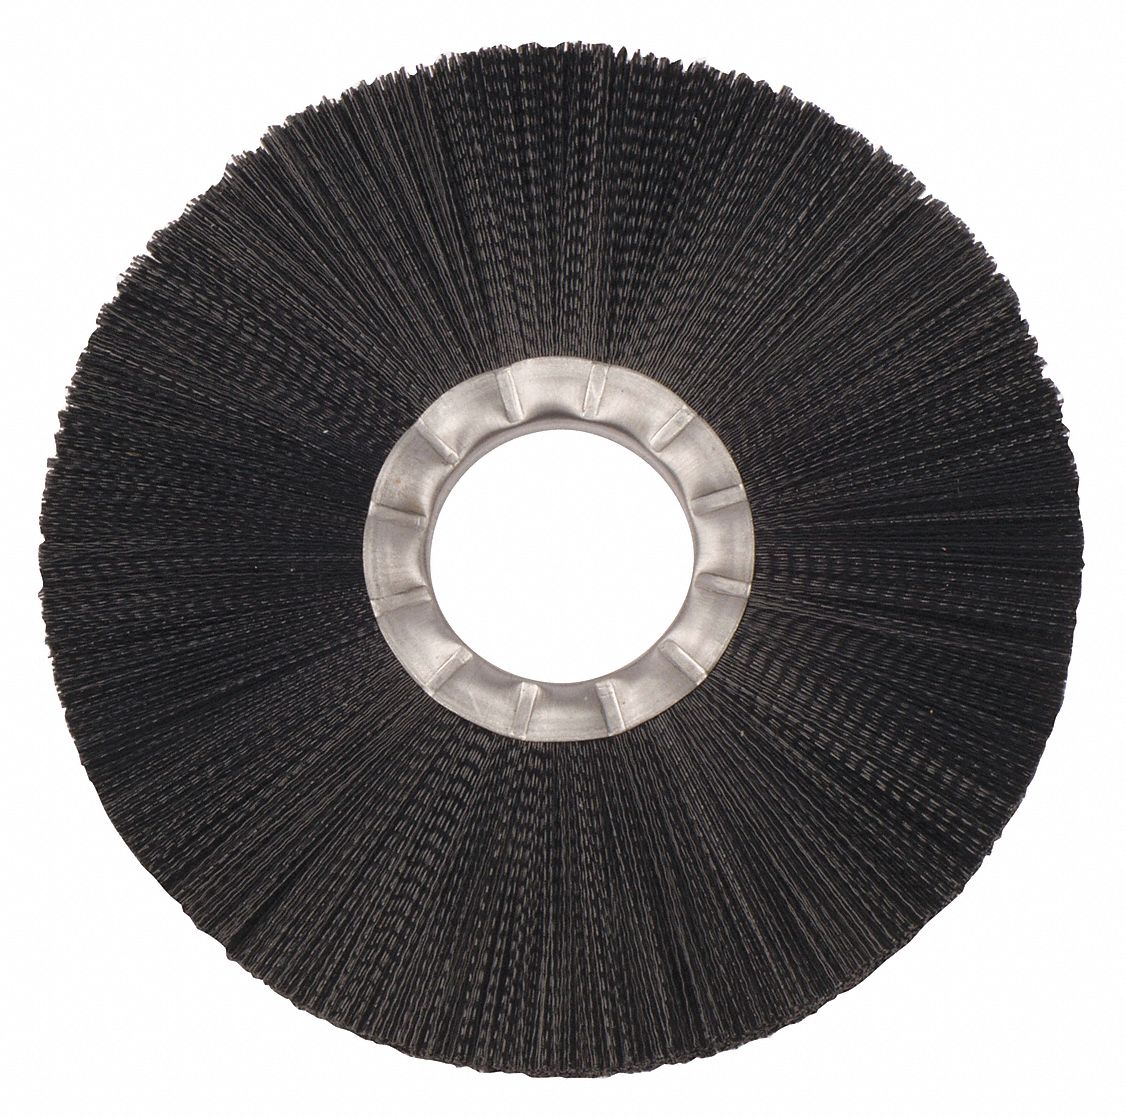 38P538 - 8In. Nylon Wheel .020 2In. A.H.(Nwa-8) - Only Shipped in Quantities of 2